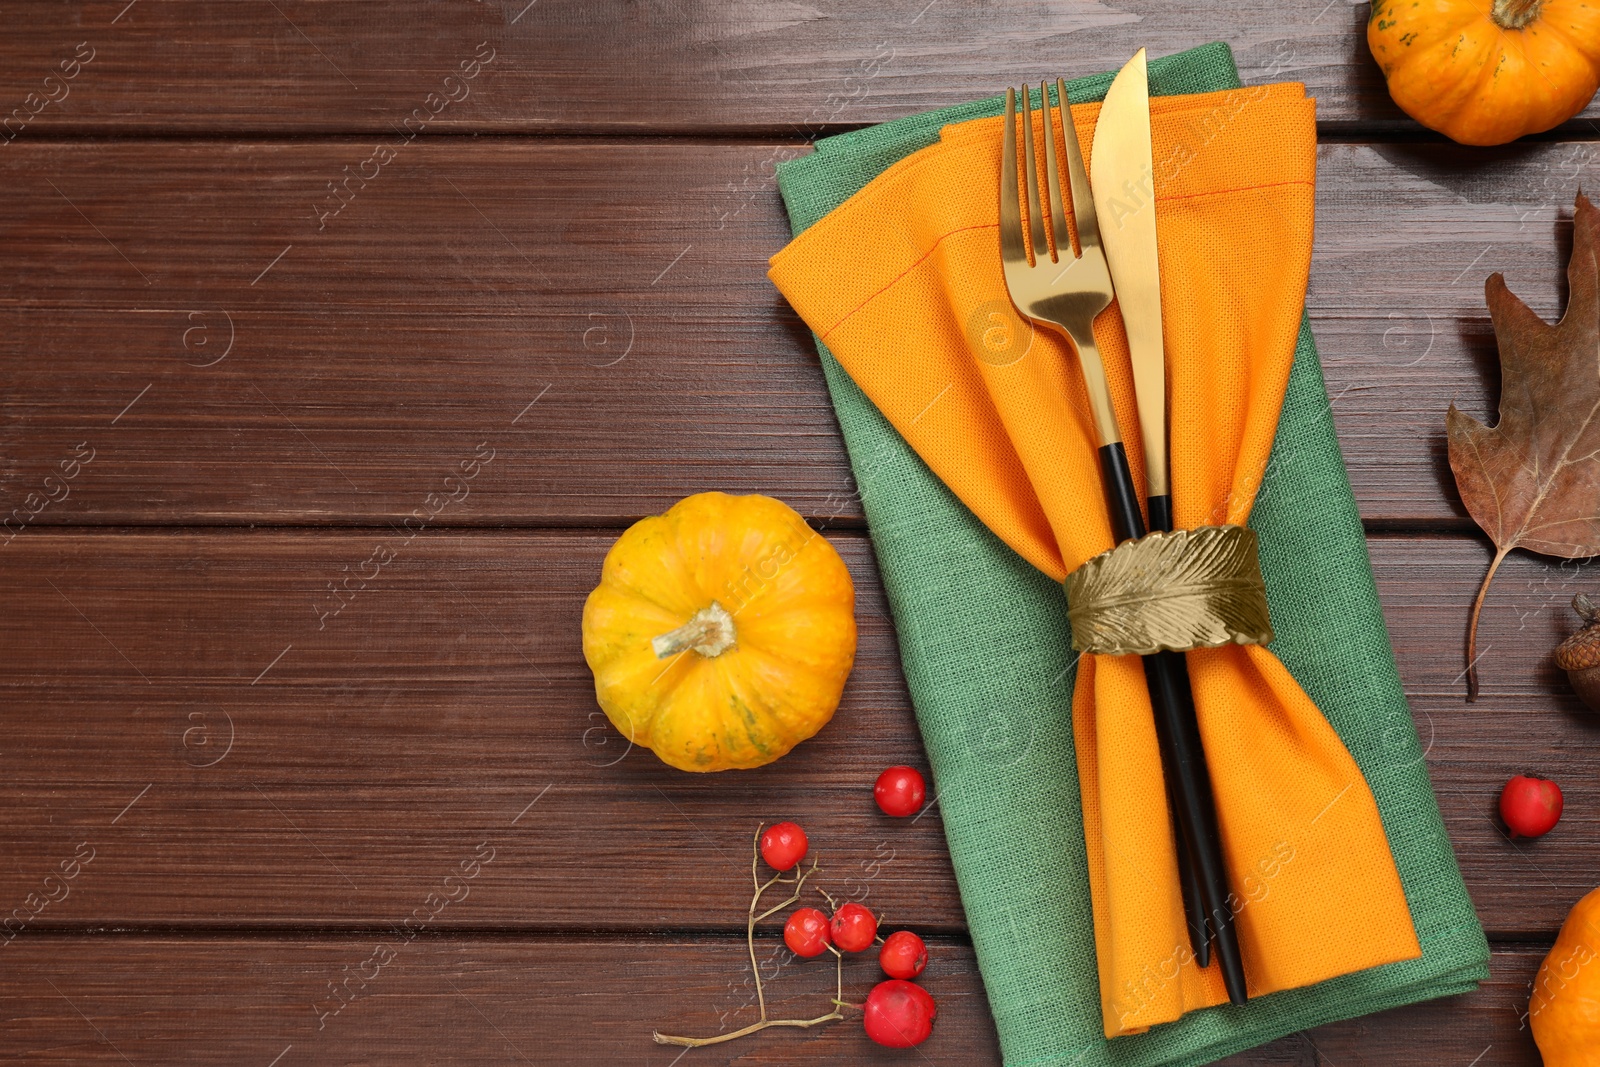 Photo of Cutlery, napkins and autumn decoration on wooden background, flat lay with space for text. Table setting